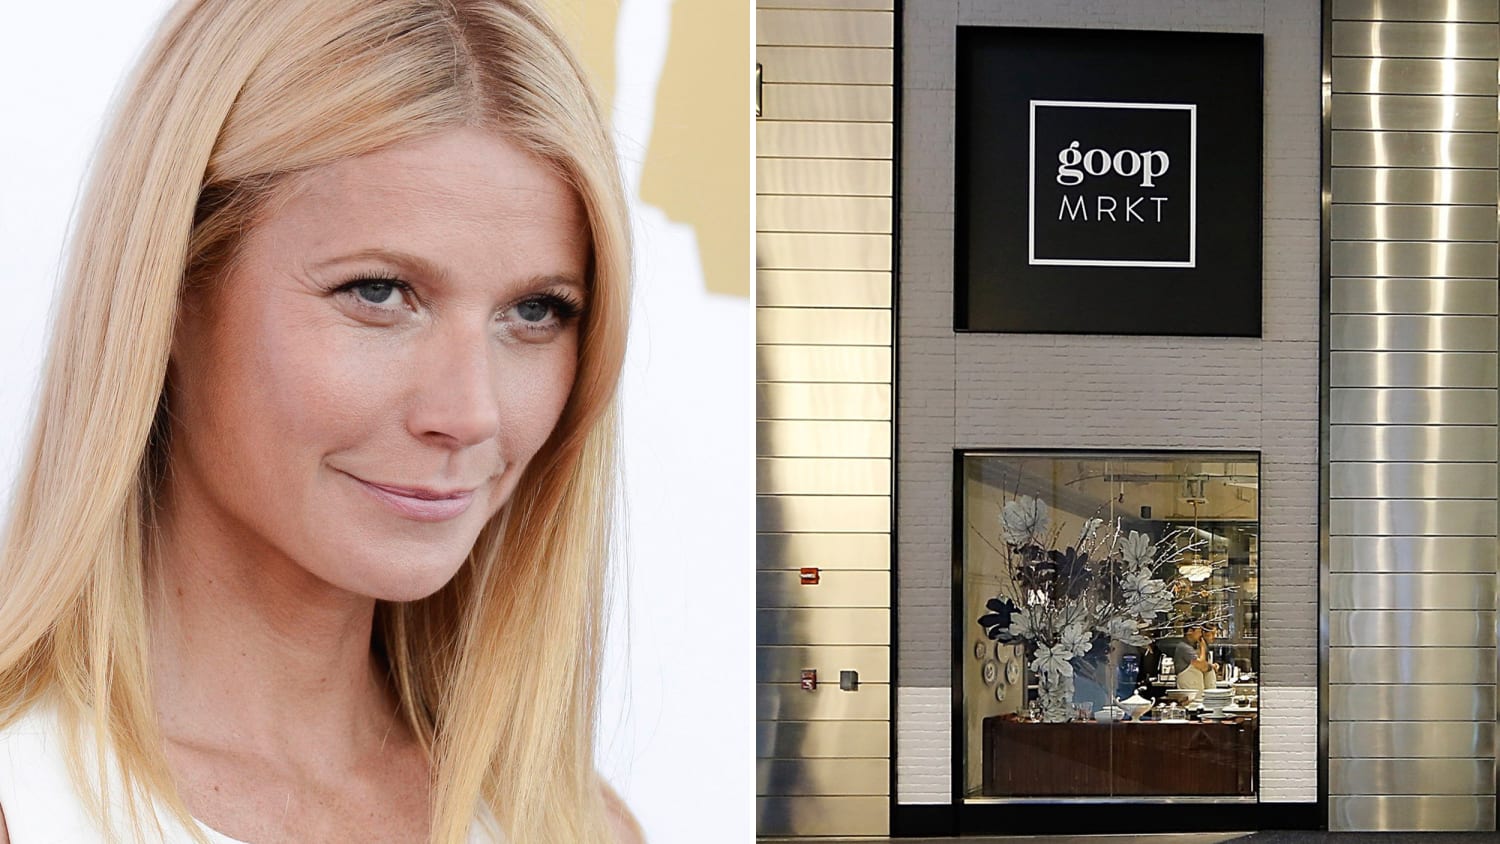 Gwyneth Paltrow's Goop pop-up shop robbed in NYC: Here are the details - TODAY.com2500 x 1407